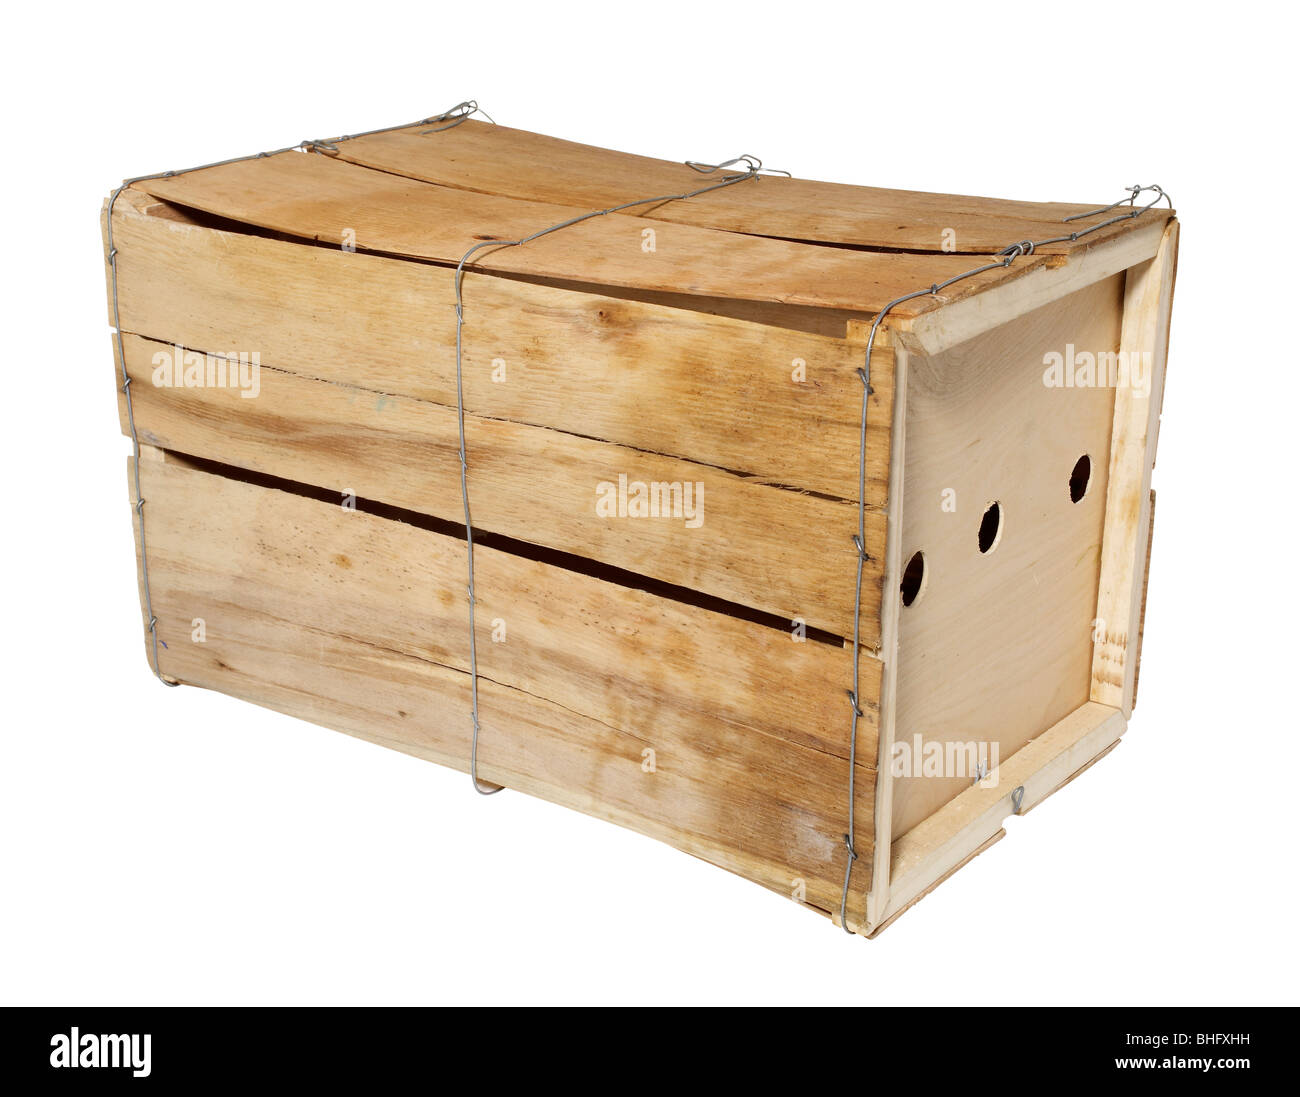 Produce Crate Stock Photo